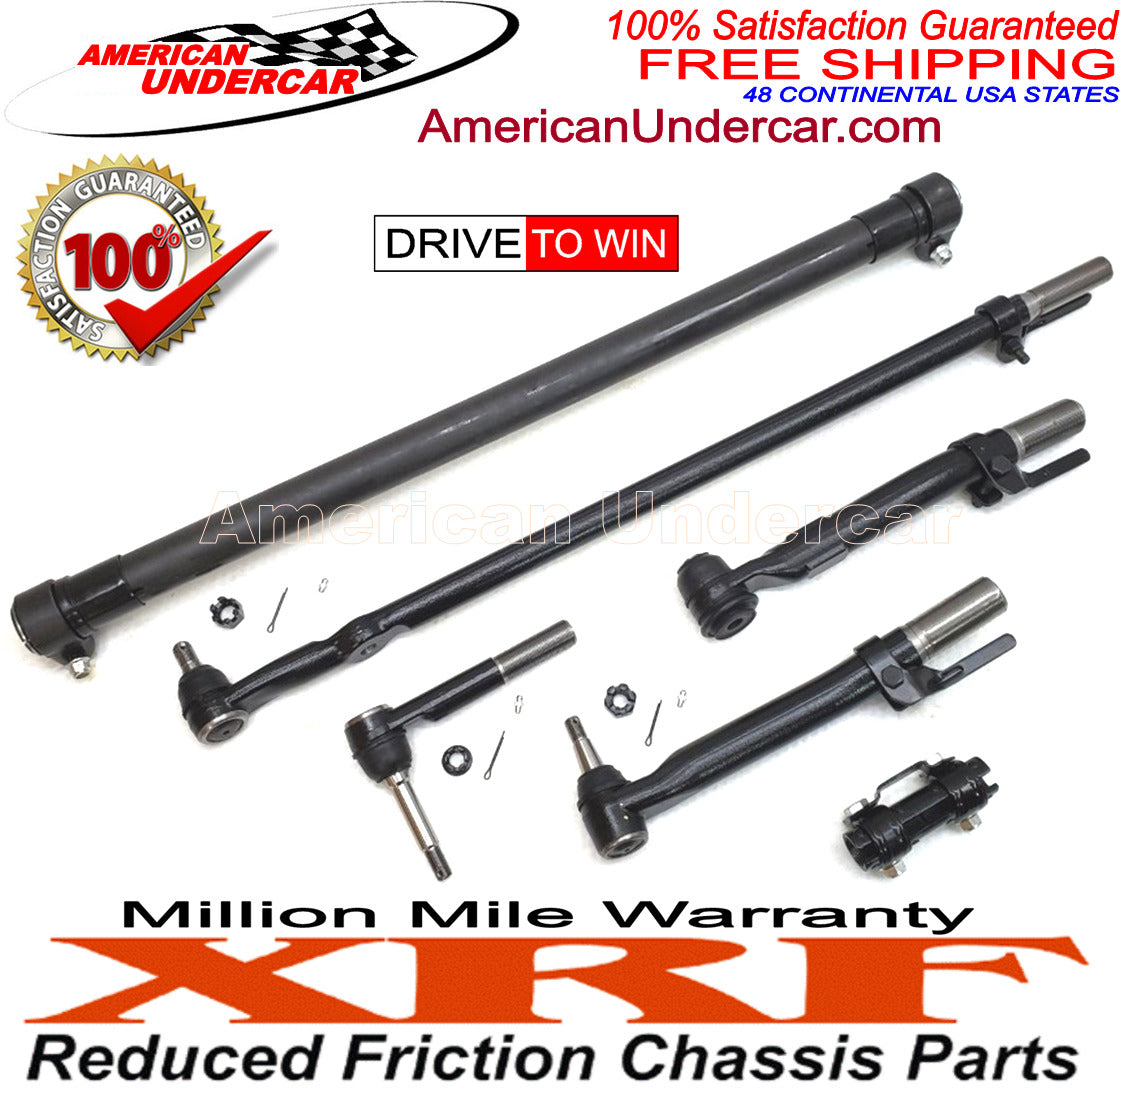 XRF Ford F250 Super Duty Tie Rod Steering and Suspension Kit 2011 - 2016 4x4